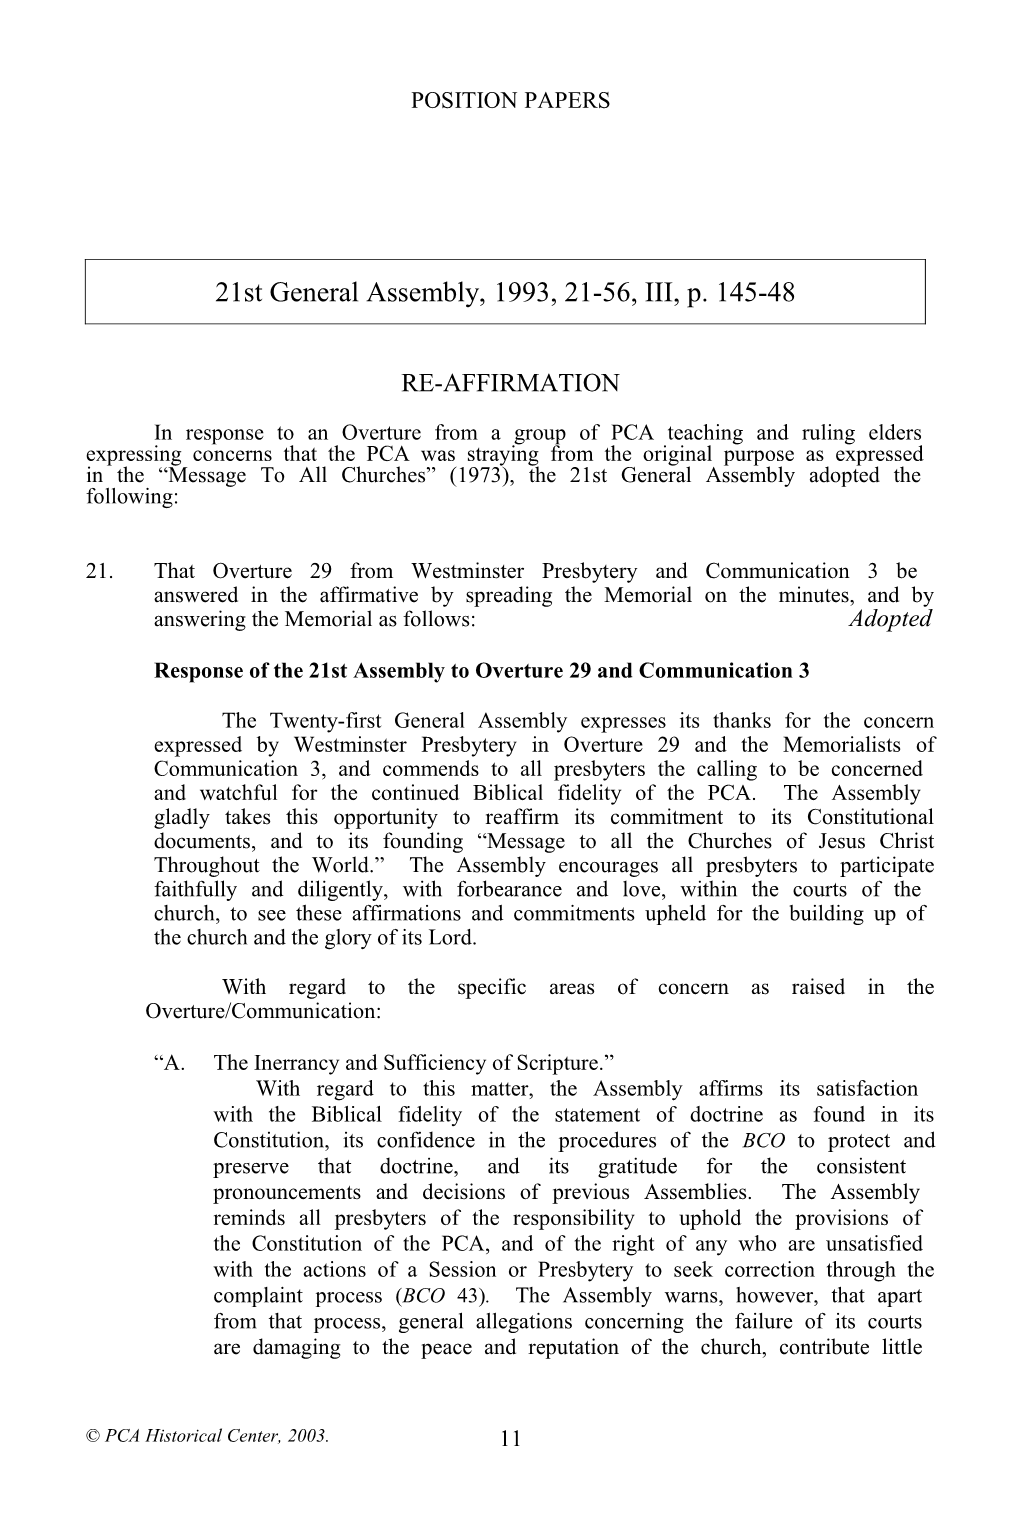 Response of the 21St Assembly to Overture 29 and Communication 3